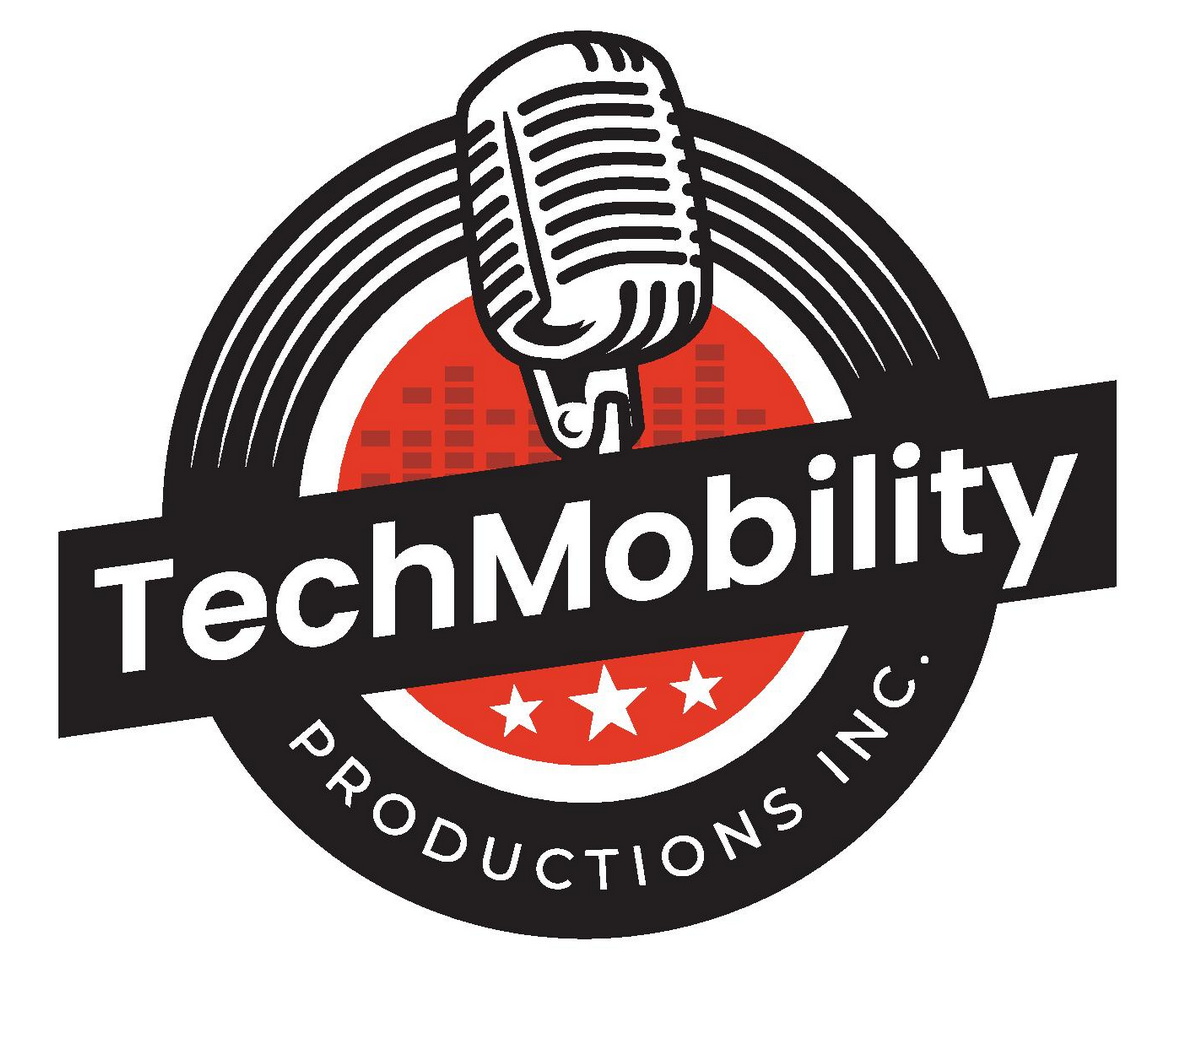  RoadWorthy Drive Productions Rebrands As TechMobility Productions